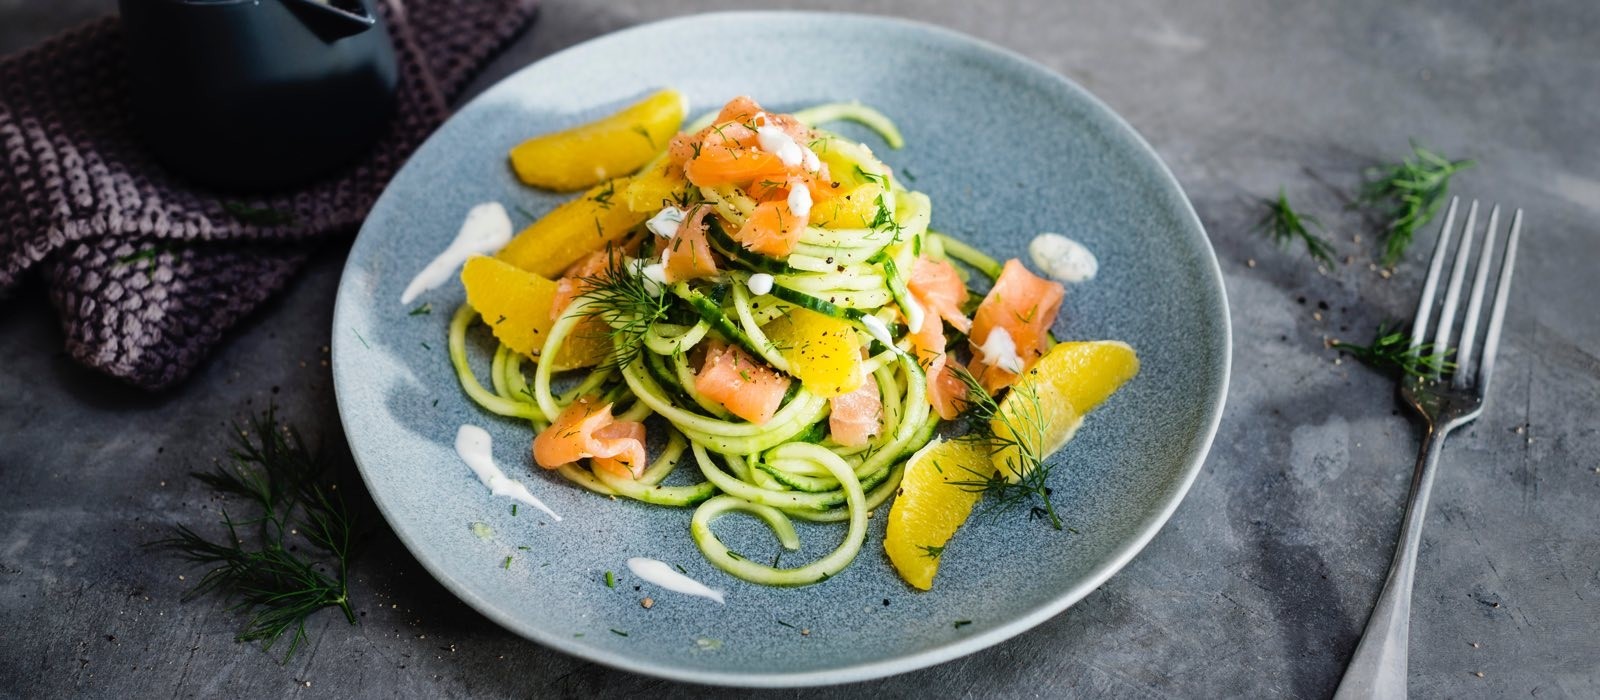 Import-Recipe - Cucumber noodles salad with smoked salmon, dill and sour cream